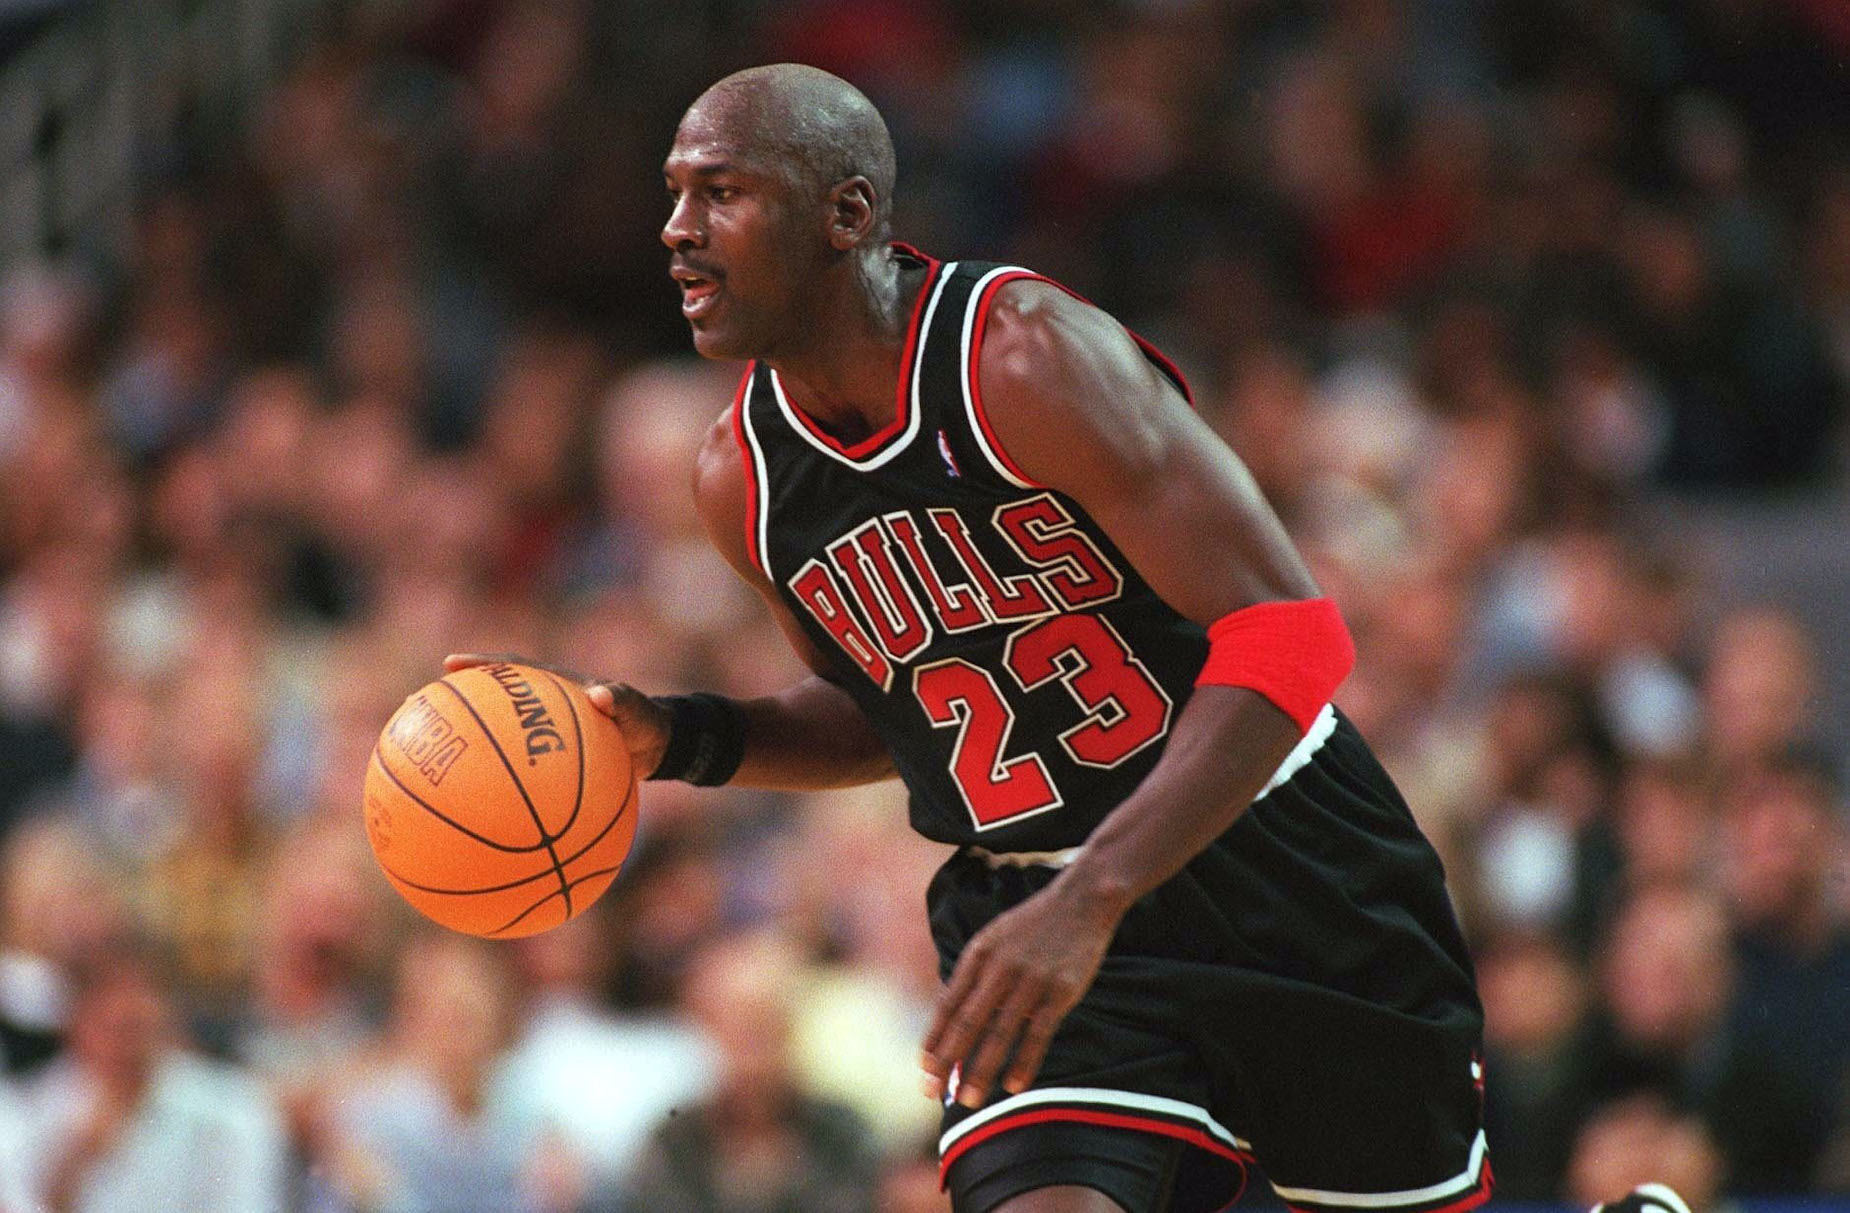 Michael Jordan dribbles the ball up the court as a member of the Chicago Bulls.